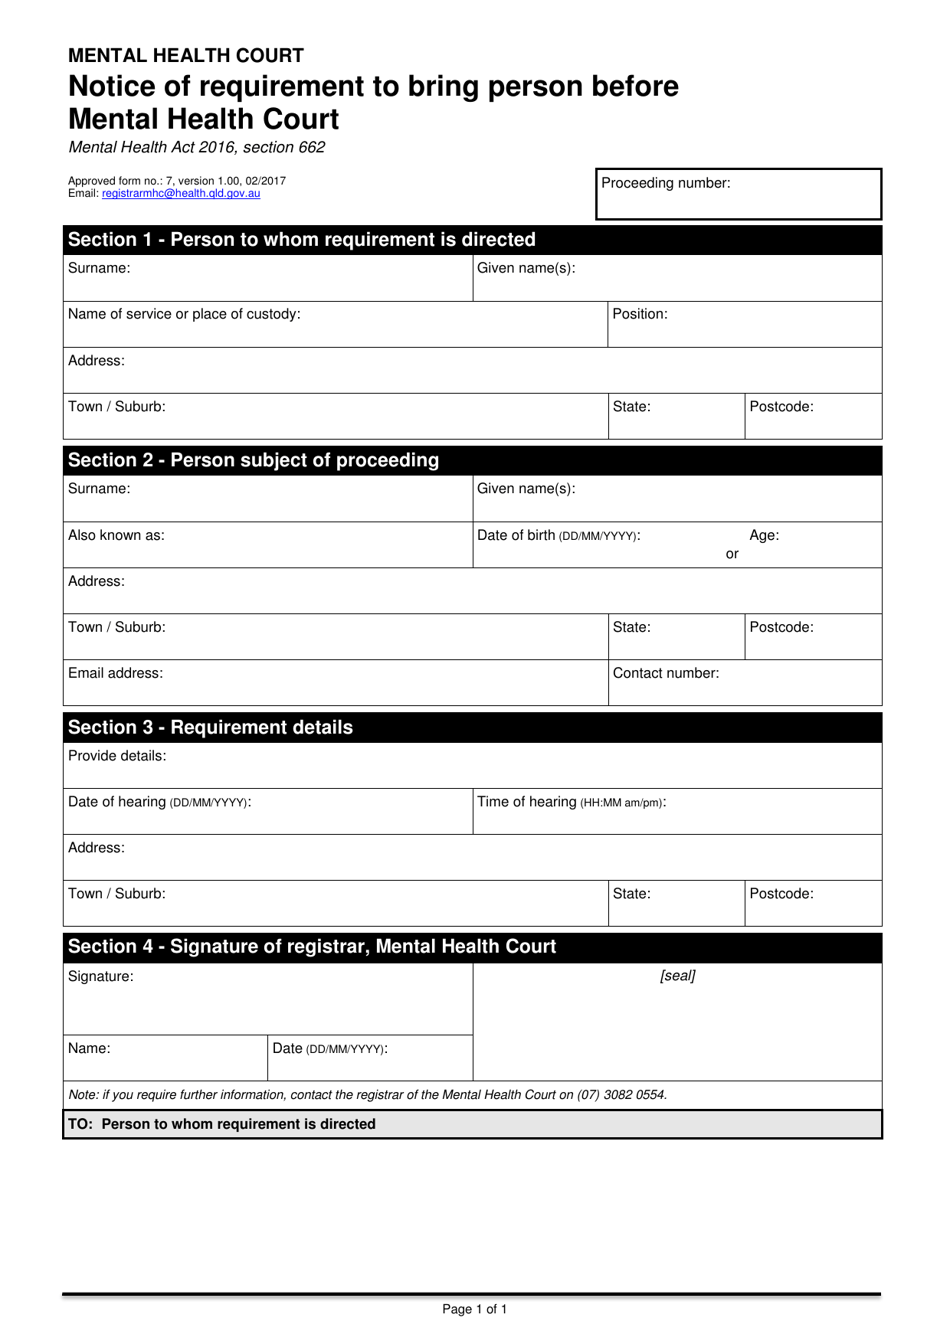 Form 7 Notice of Requirement to Bring Person Before Mental Health Court - Queensland, Australia, Page 1